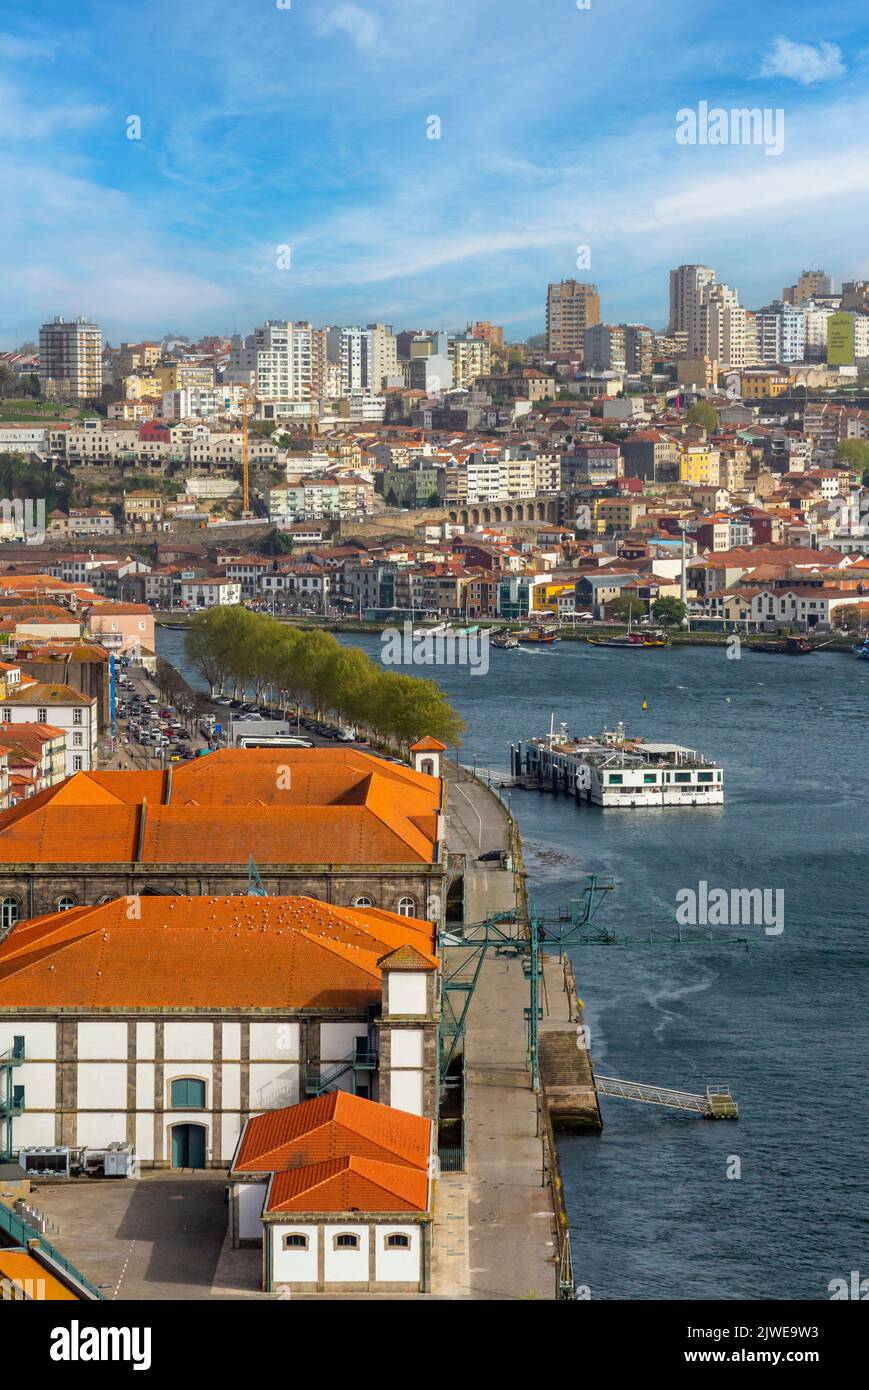 Tourist sightseeing boat sailing on the River Douro in the centre of Porto a major city in northern Portugal. Stock Photo